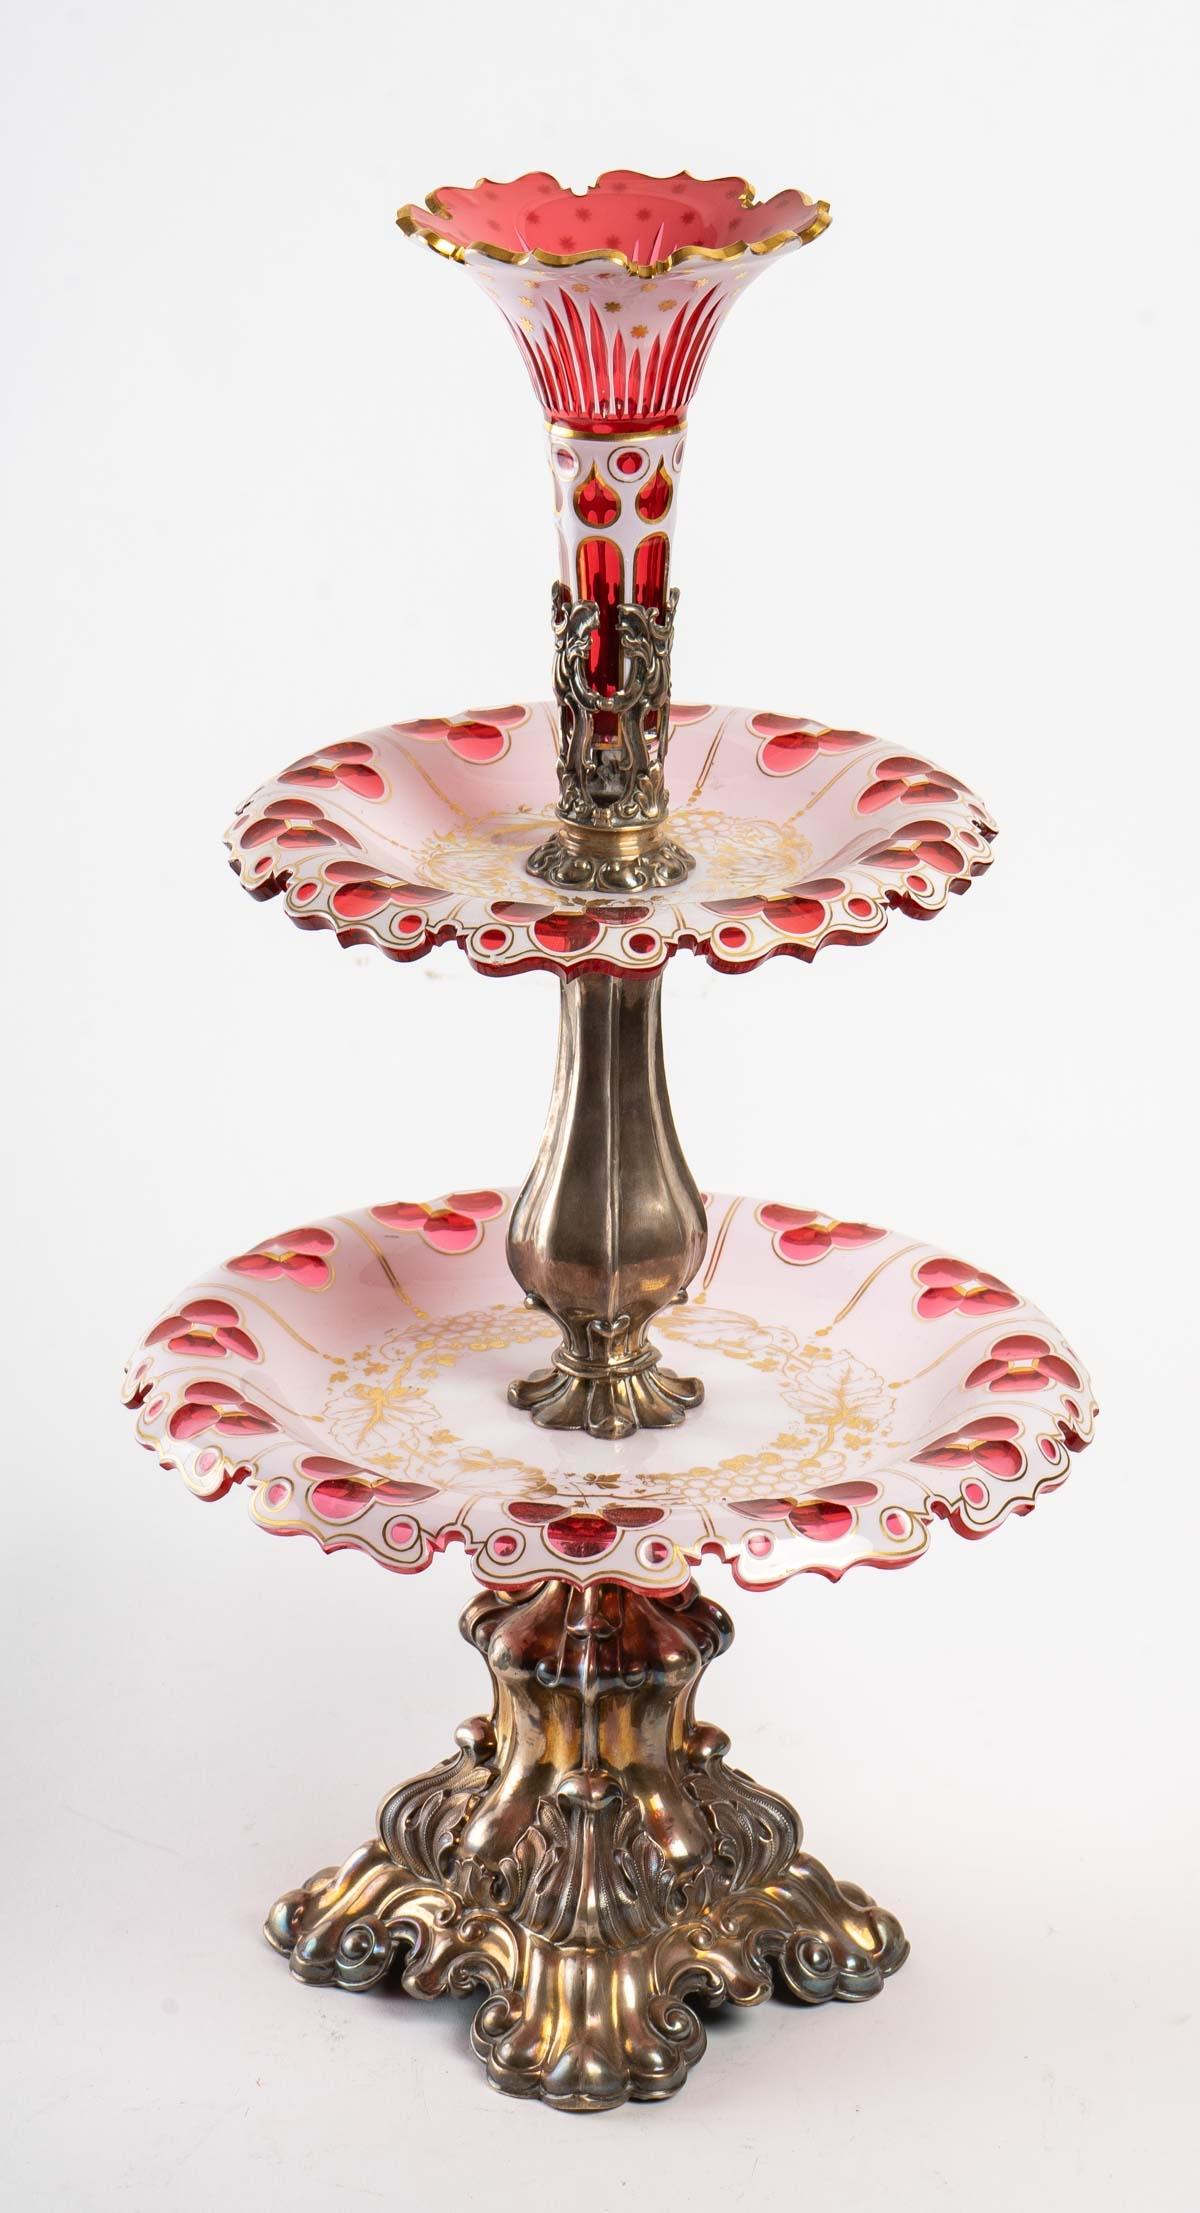 Tulip in red Bohemian crystal and white opaline called overlay with a tree leaf decoration in gold with a silver stand.
Measures: H 52cm, D 28cm.